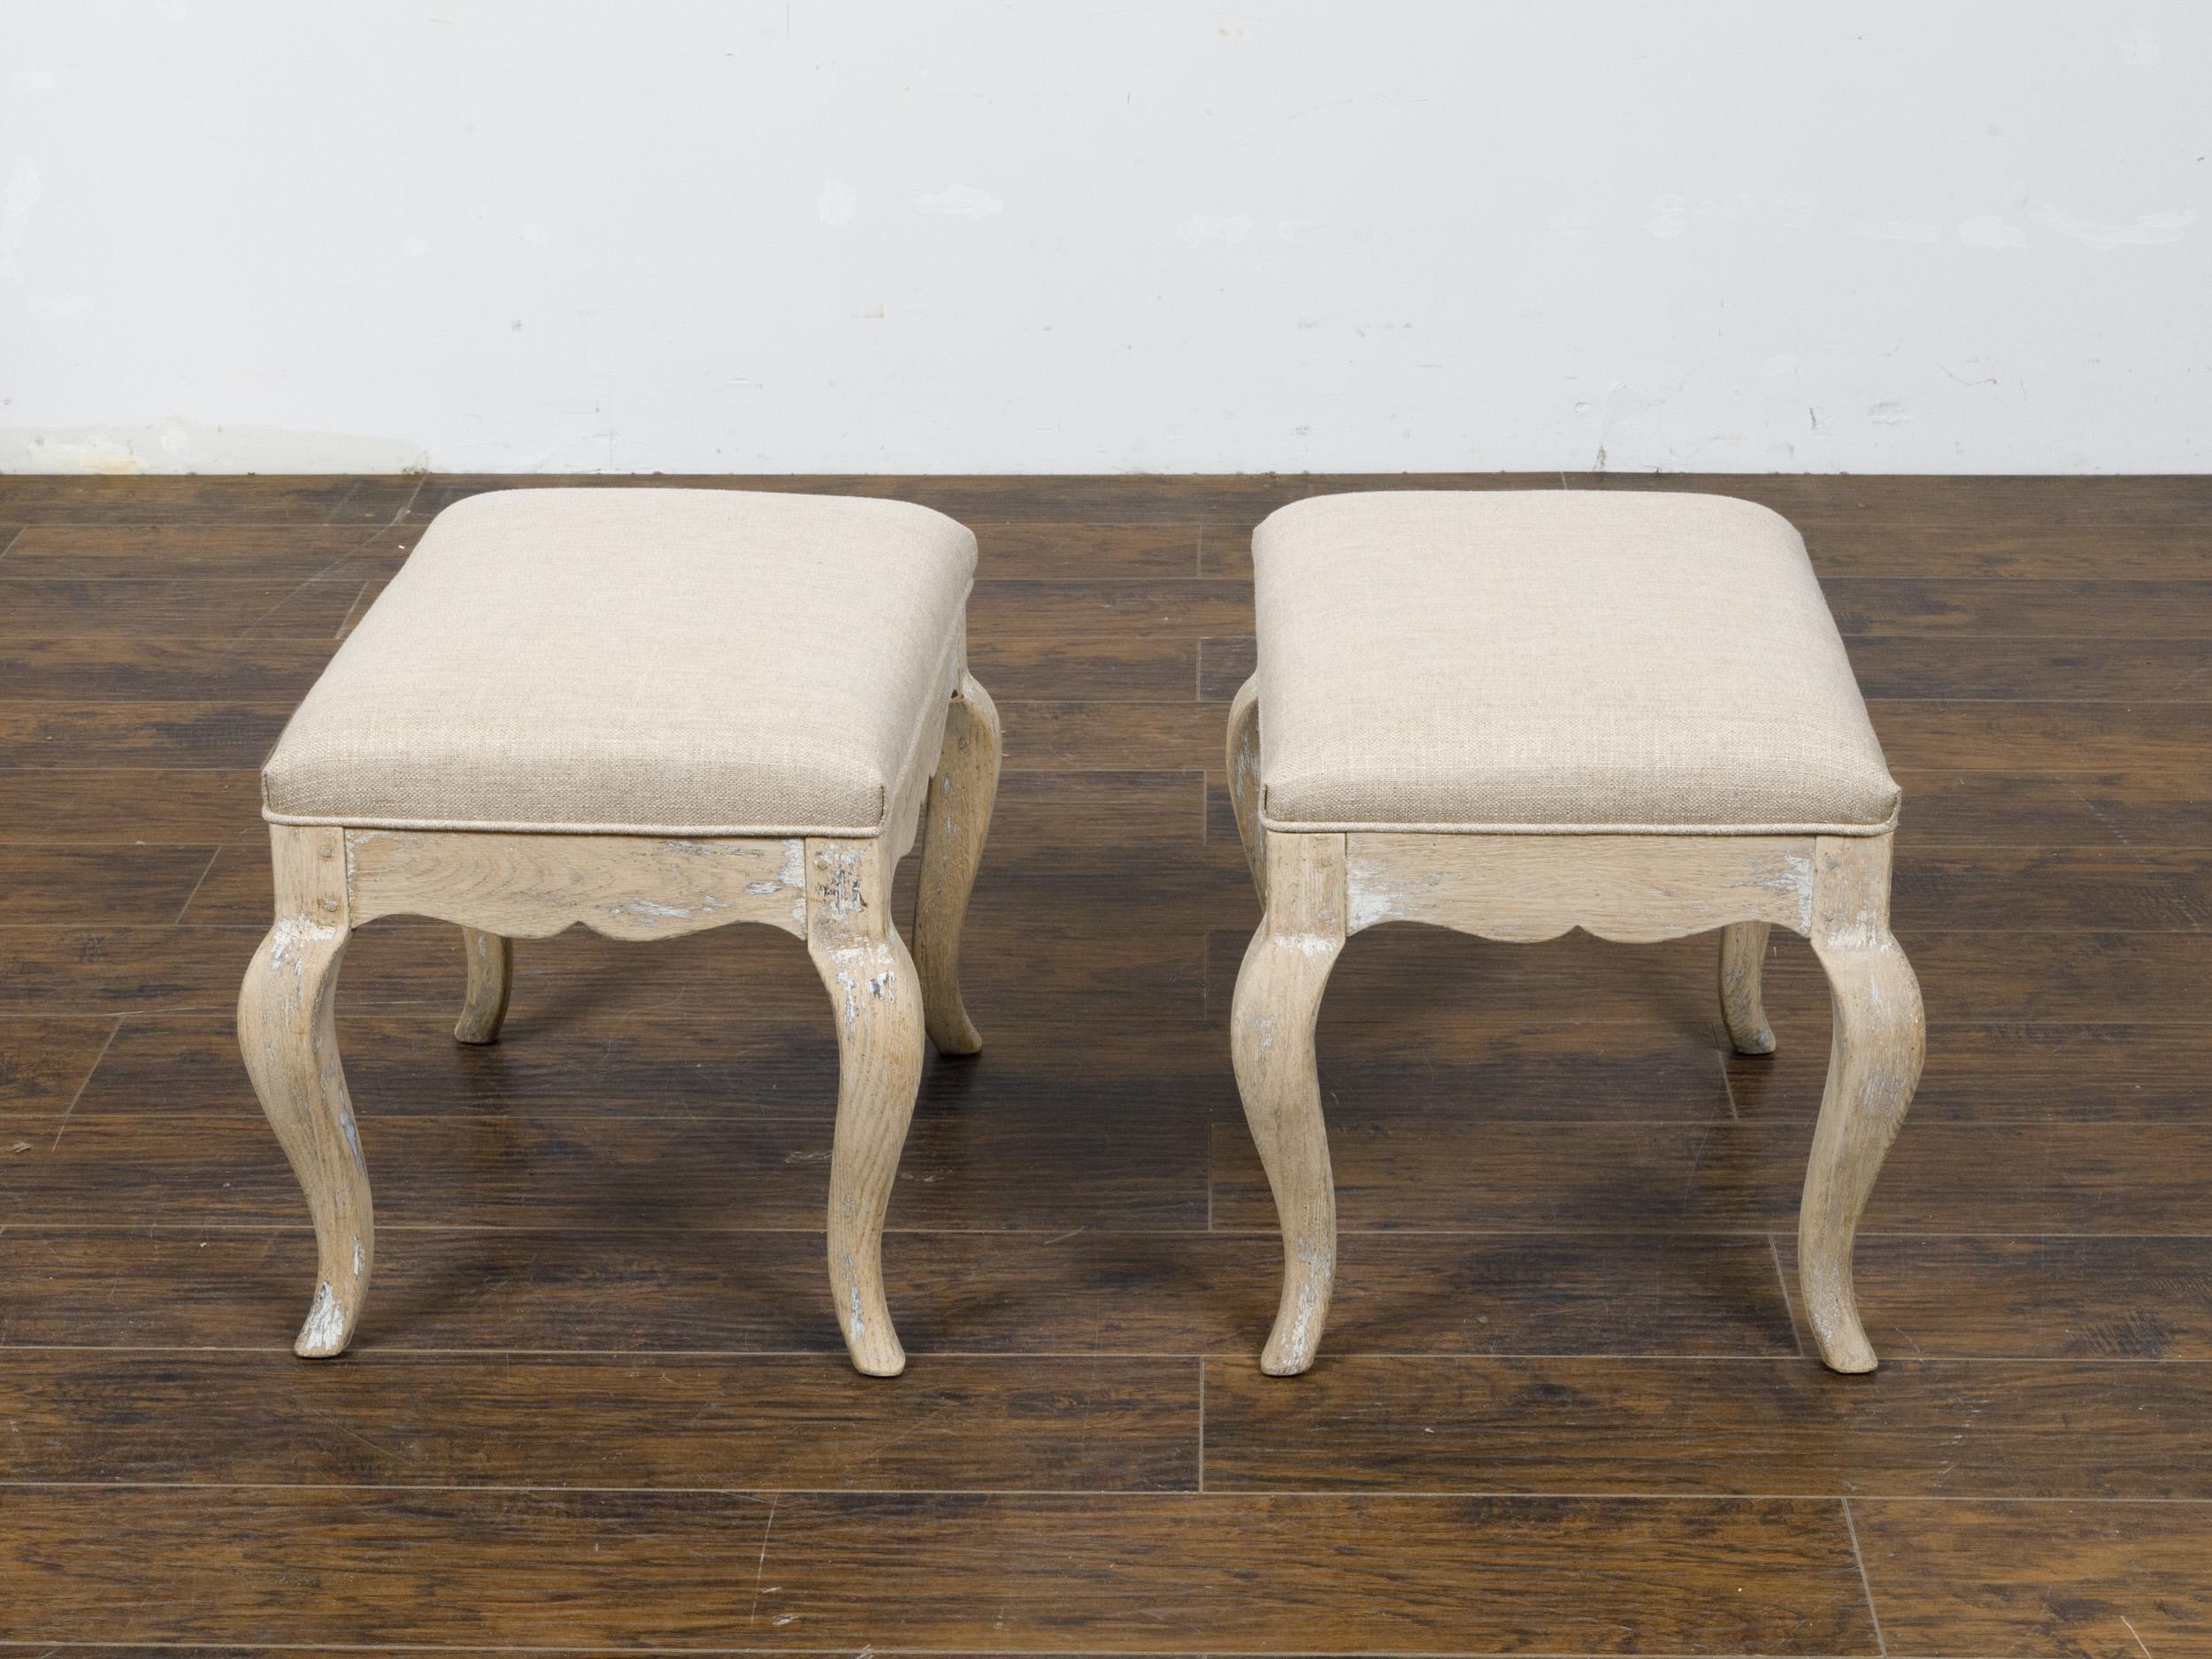 20th Century Pair of Midcentury French Rococo Style Oak Stools with Scalloped Aprons